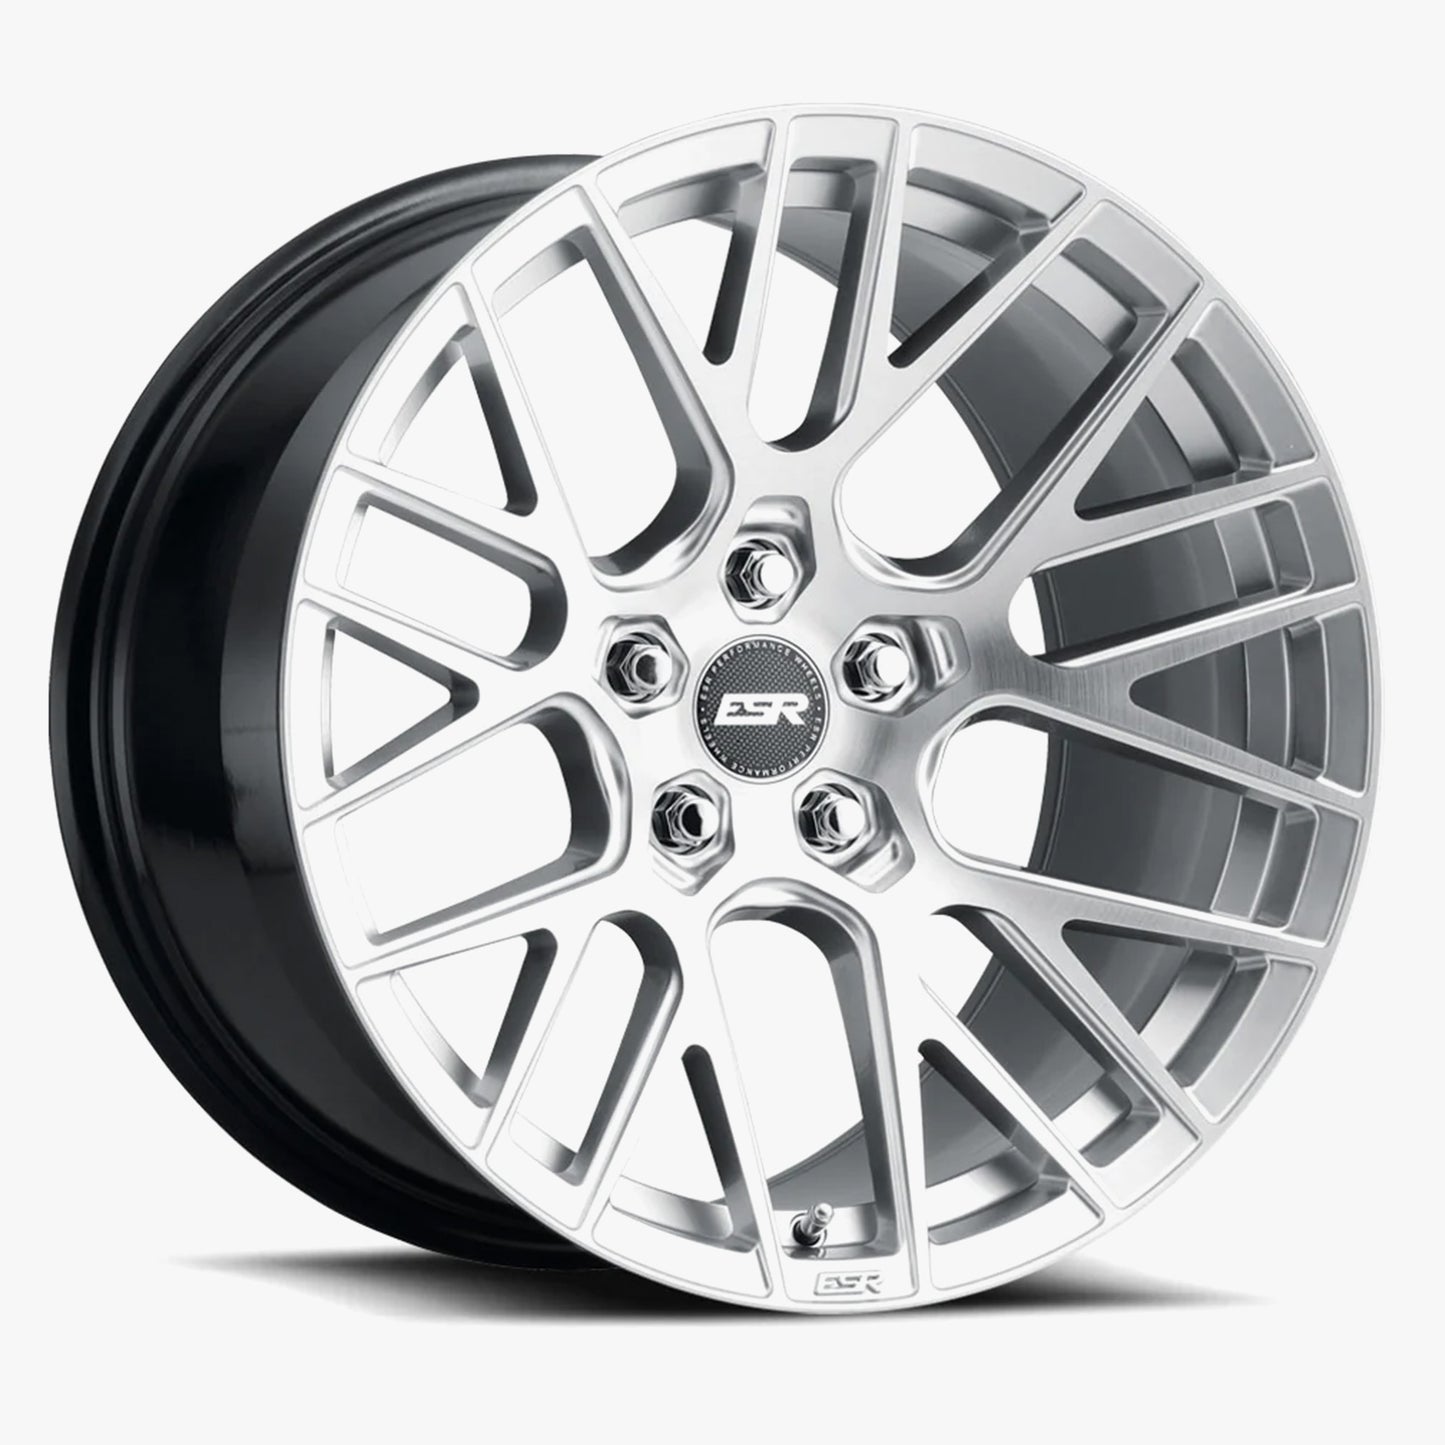 FORGETECH SERIES RF11 Brushed Hyper Silver Brushed Hyper Silver 20x10.5 +40 5x115 (Custom Drill)